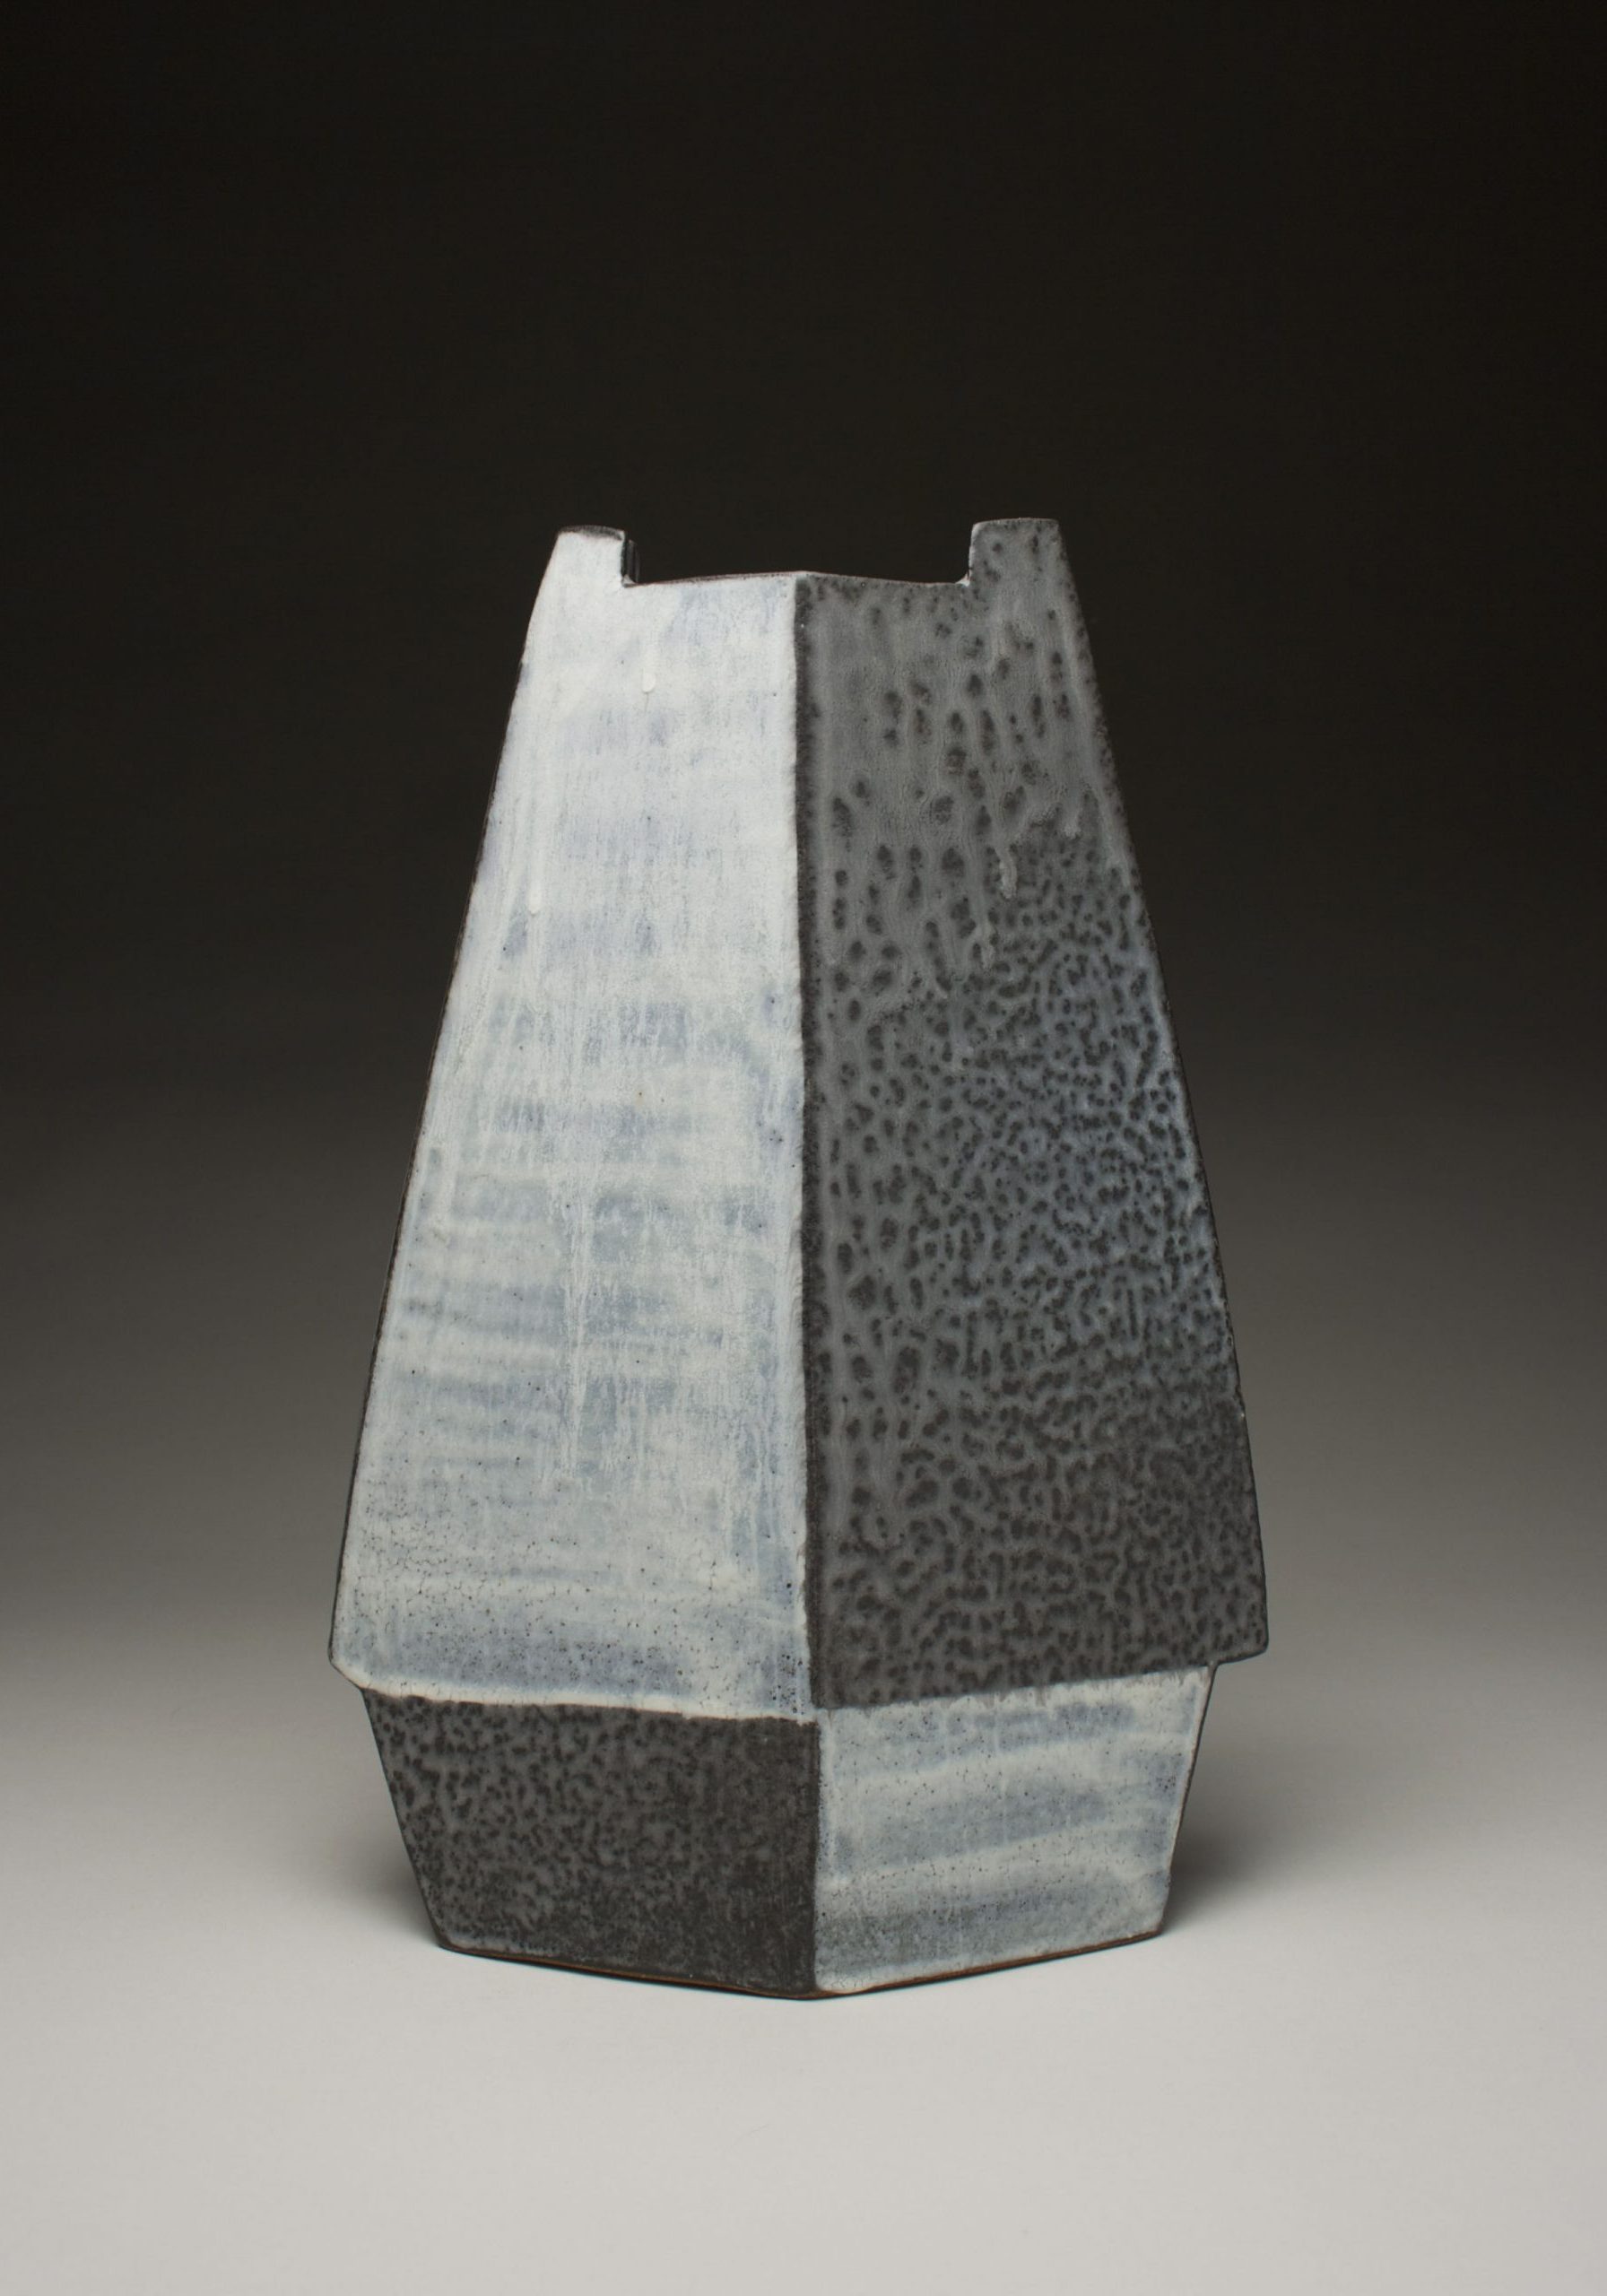 Ernest Miller, Vase, 2020, stoneware, slip, and glaze, 12.5x8.5x5 inches, collection of the artist